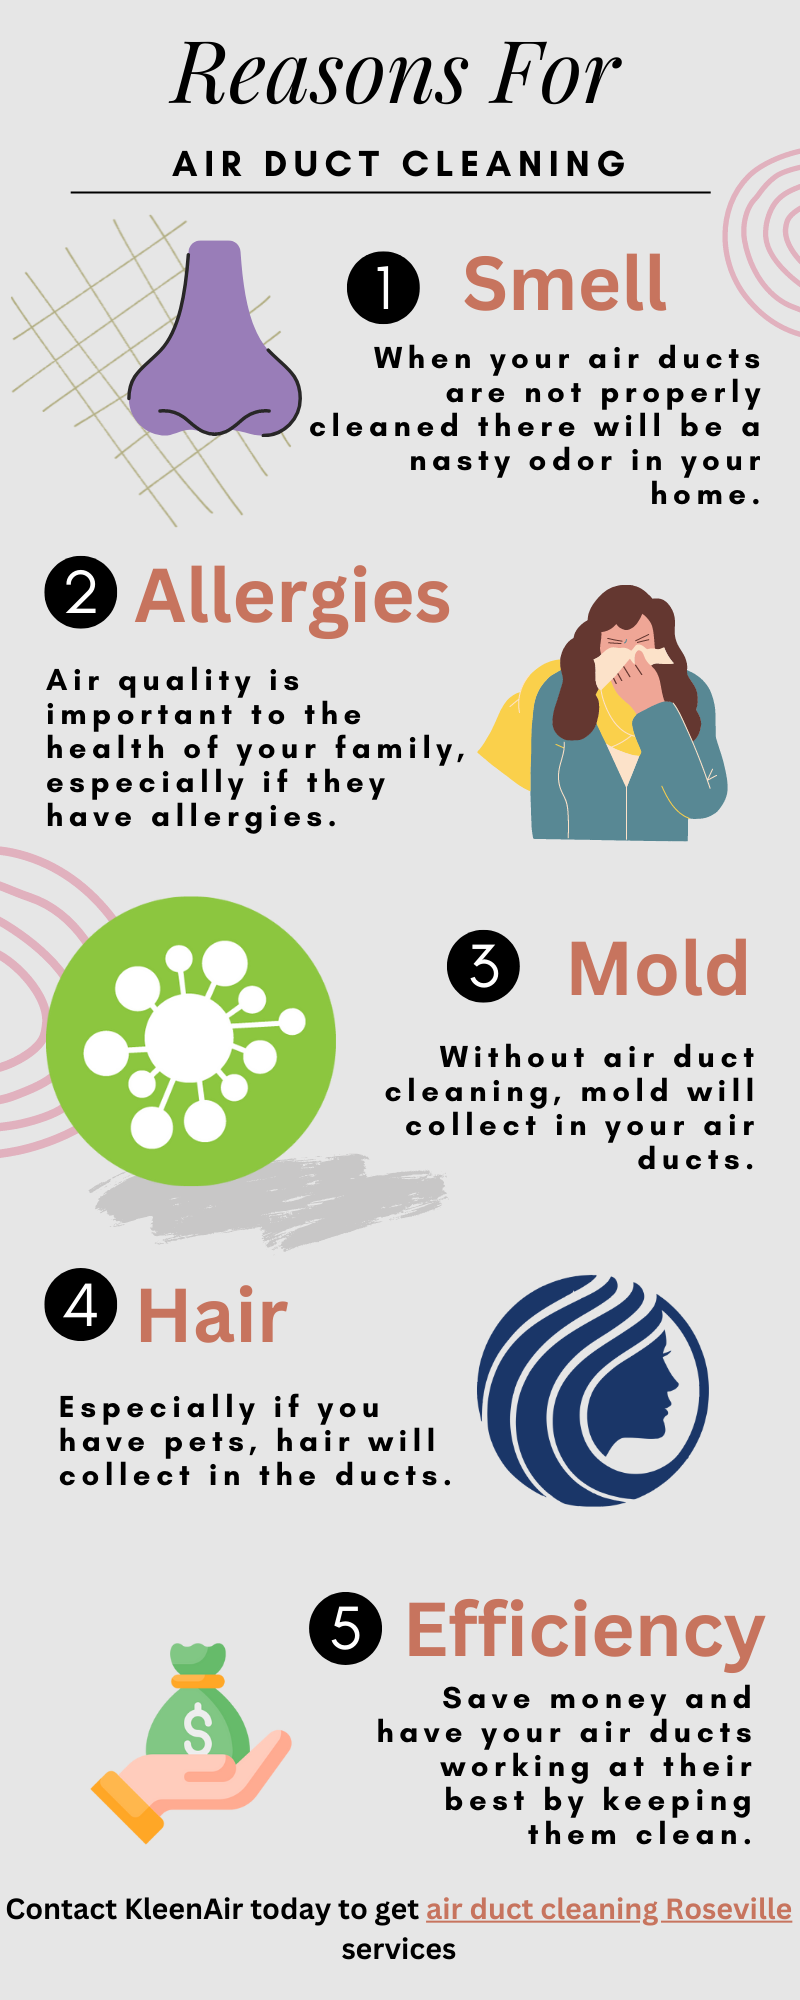 Reasons For Air Duct Cleaning